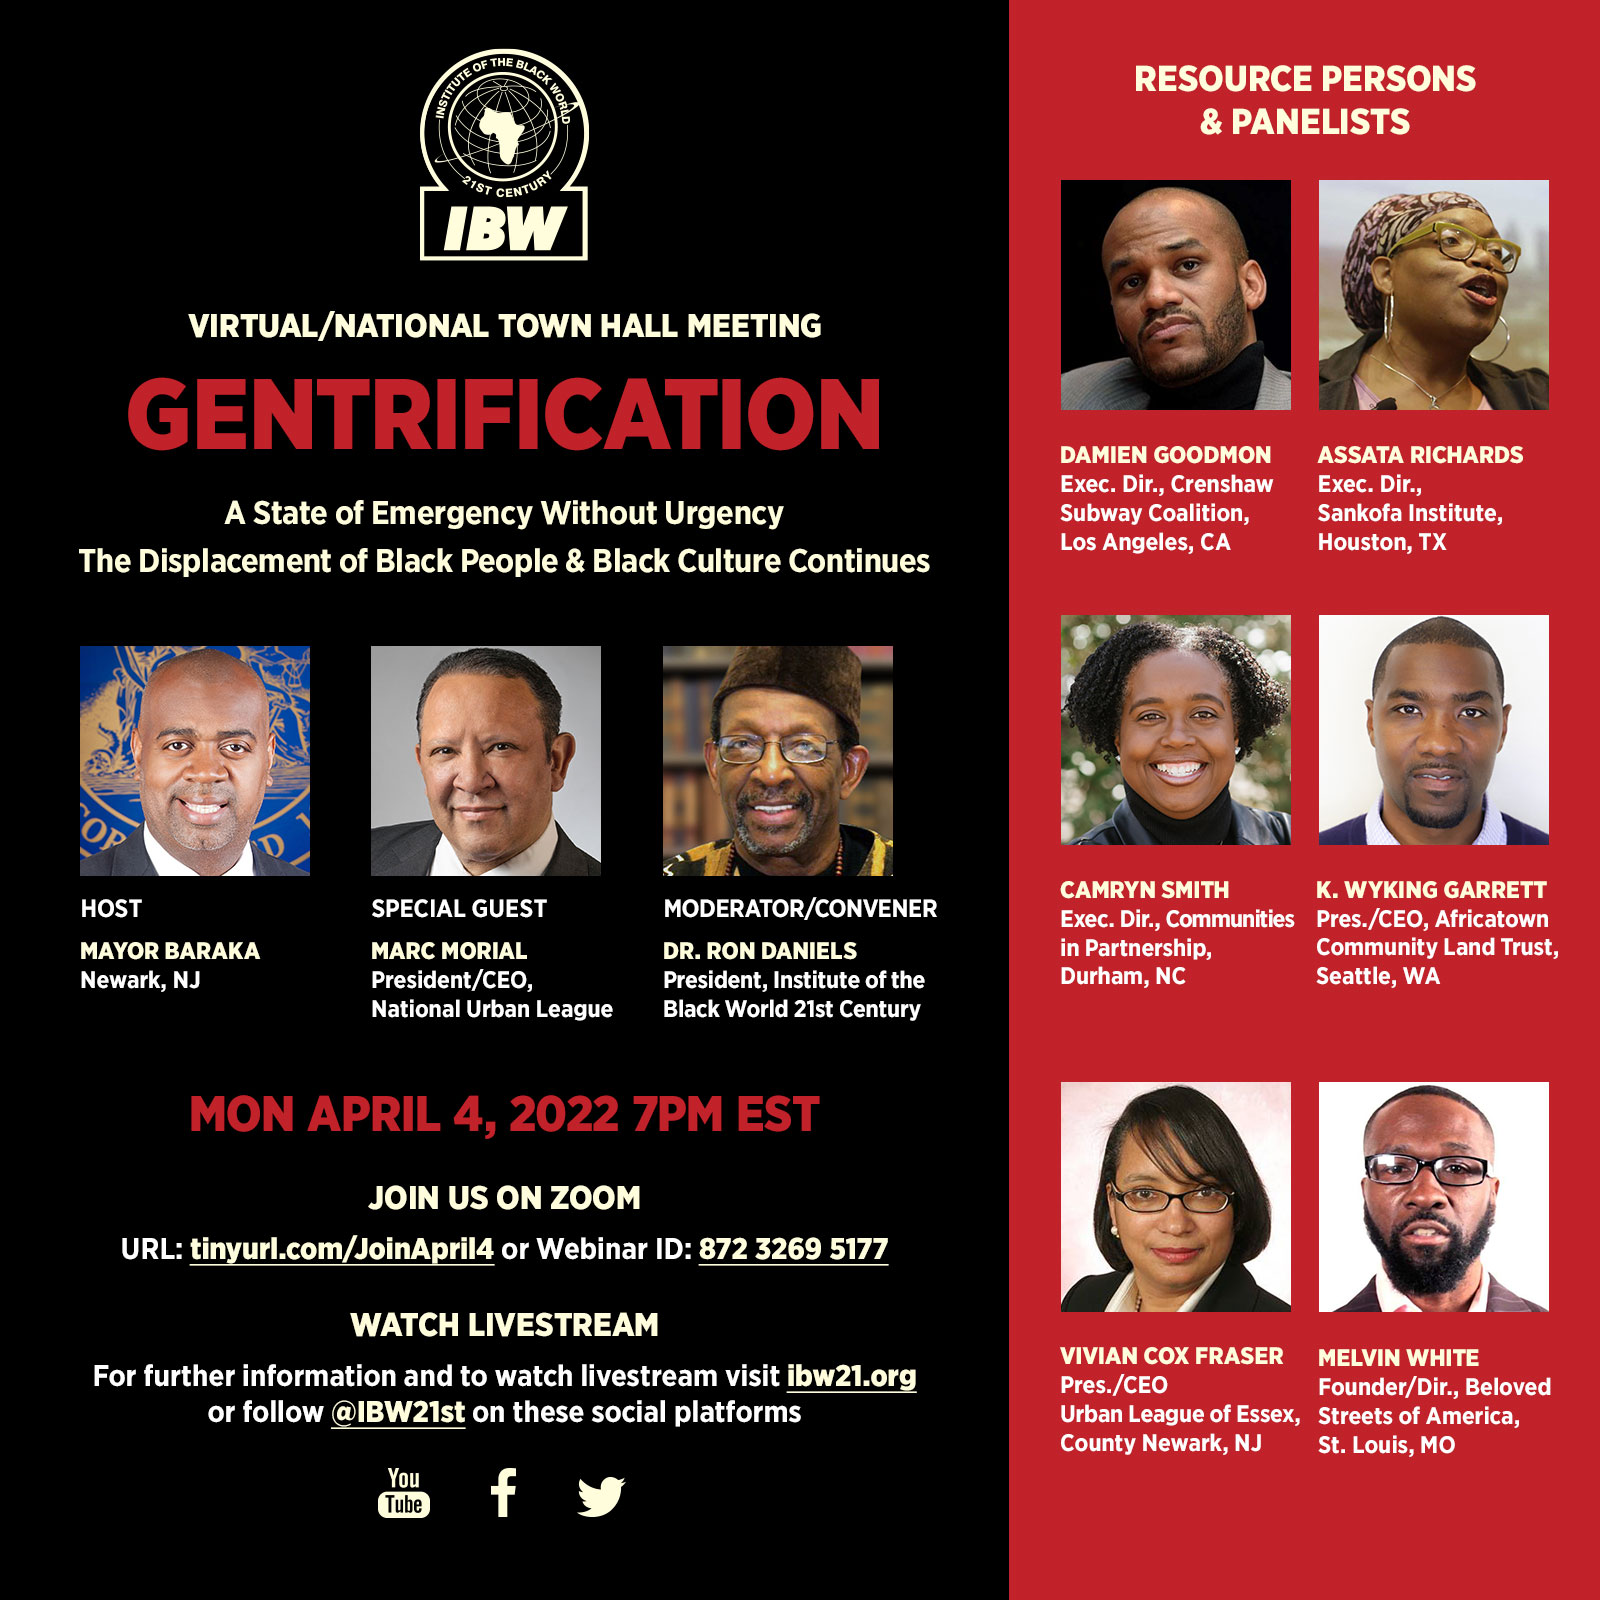 A Virtual National Town Hall Meeting to Mobilize Support for the Declaration of Gentrification as a “State of Emergency in Black America and Create a United Front to Defend and Develop Sustainable Black Communities. Hosted by Ras J. Baraka, Mayor, Newark, NJ. Convened by the Institute of the Black World 21st Century, Dr. Ron Daniels, President.